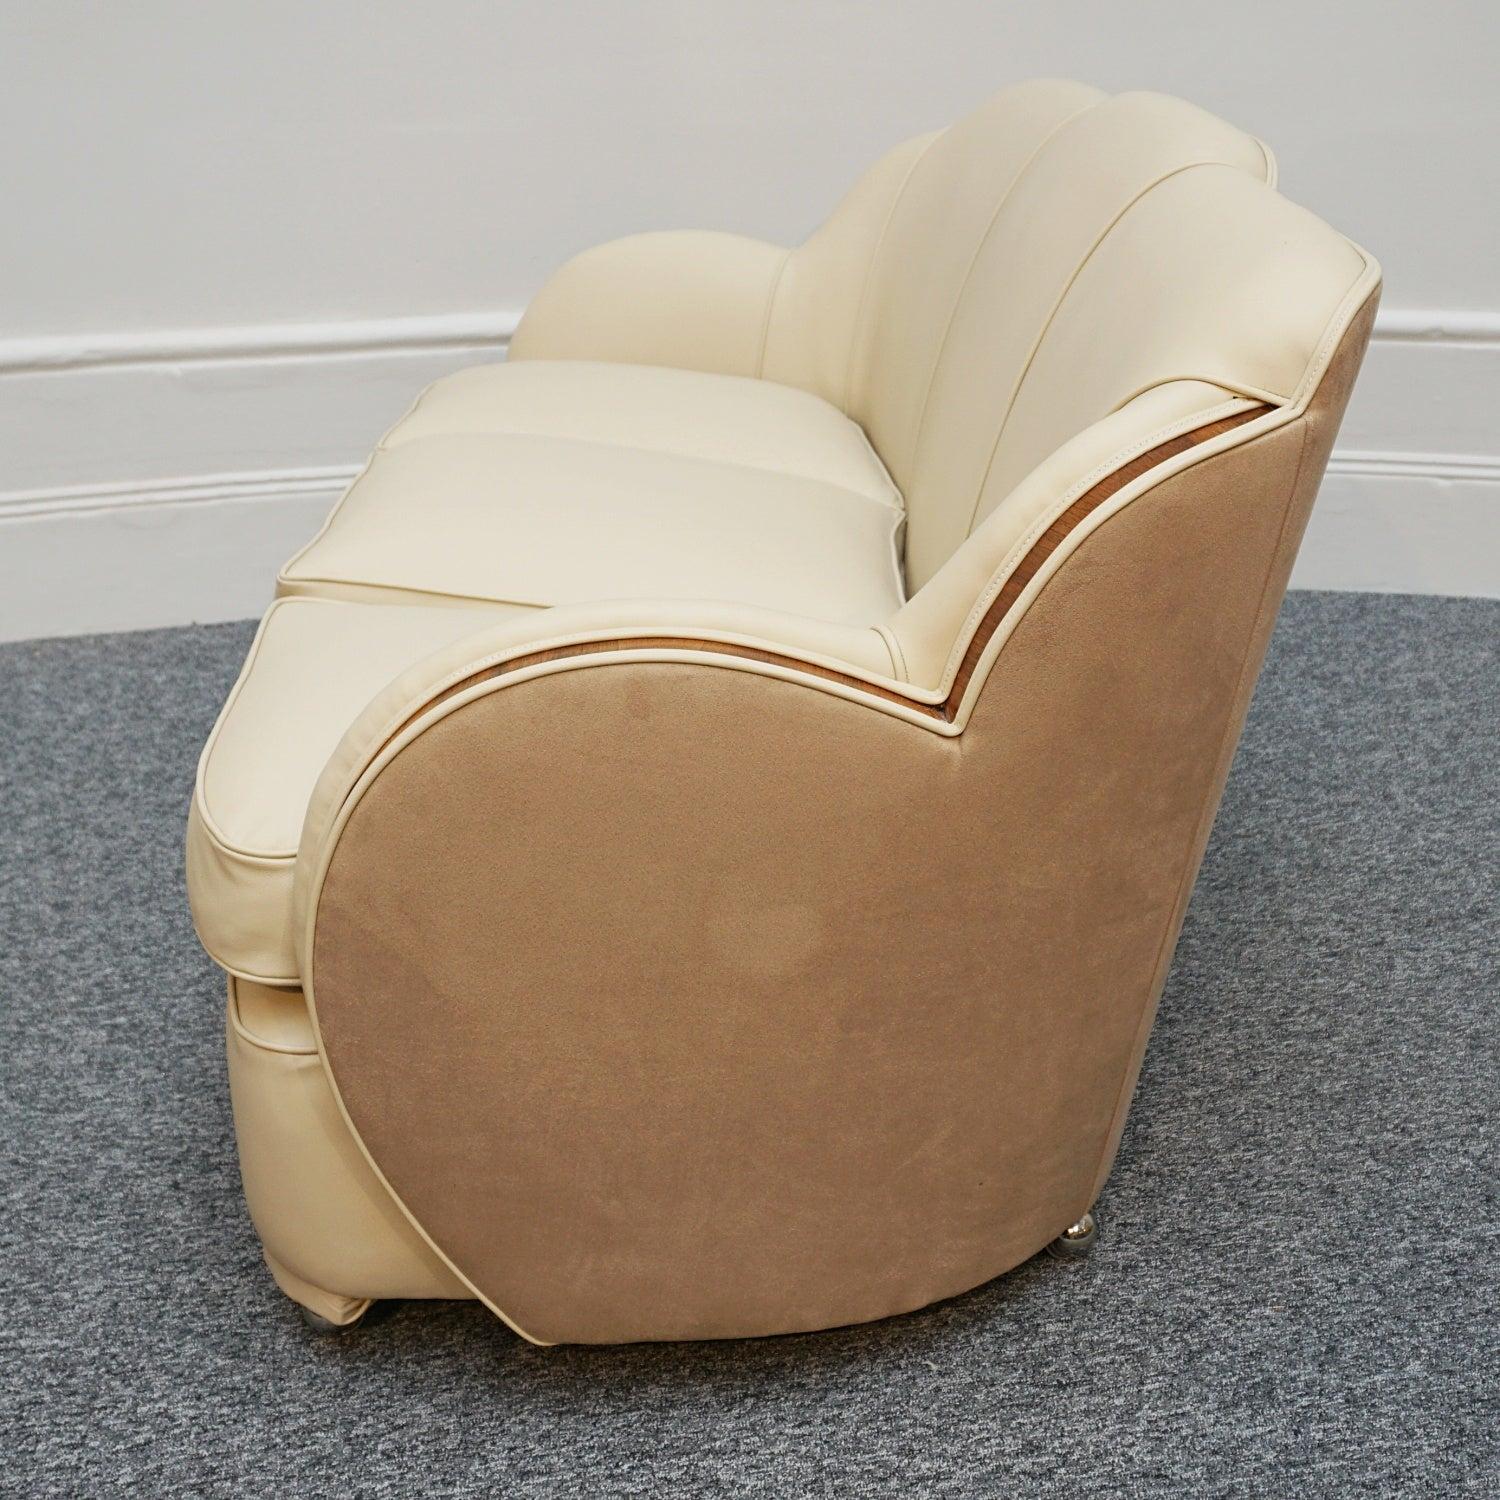 Art Deco Cloud Sofa Re-Upholstered in Cream Leather with Walnut Banding 4